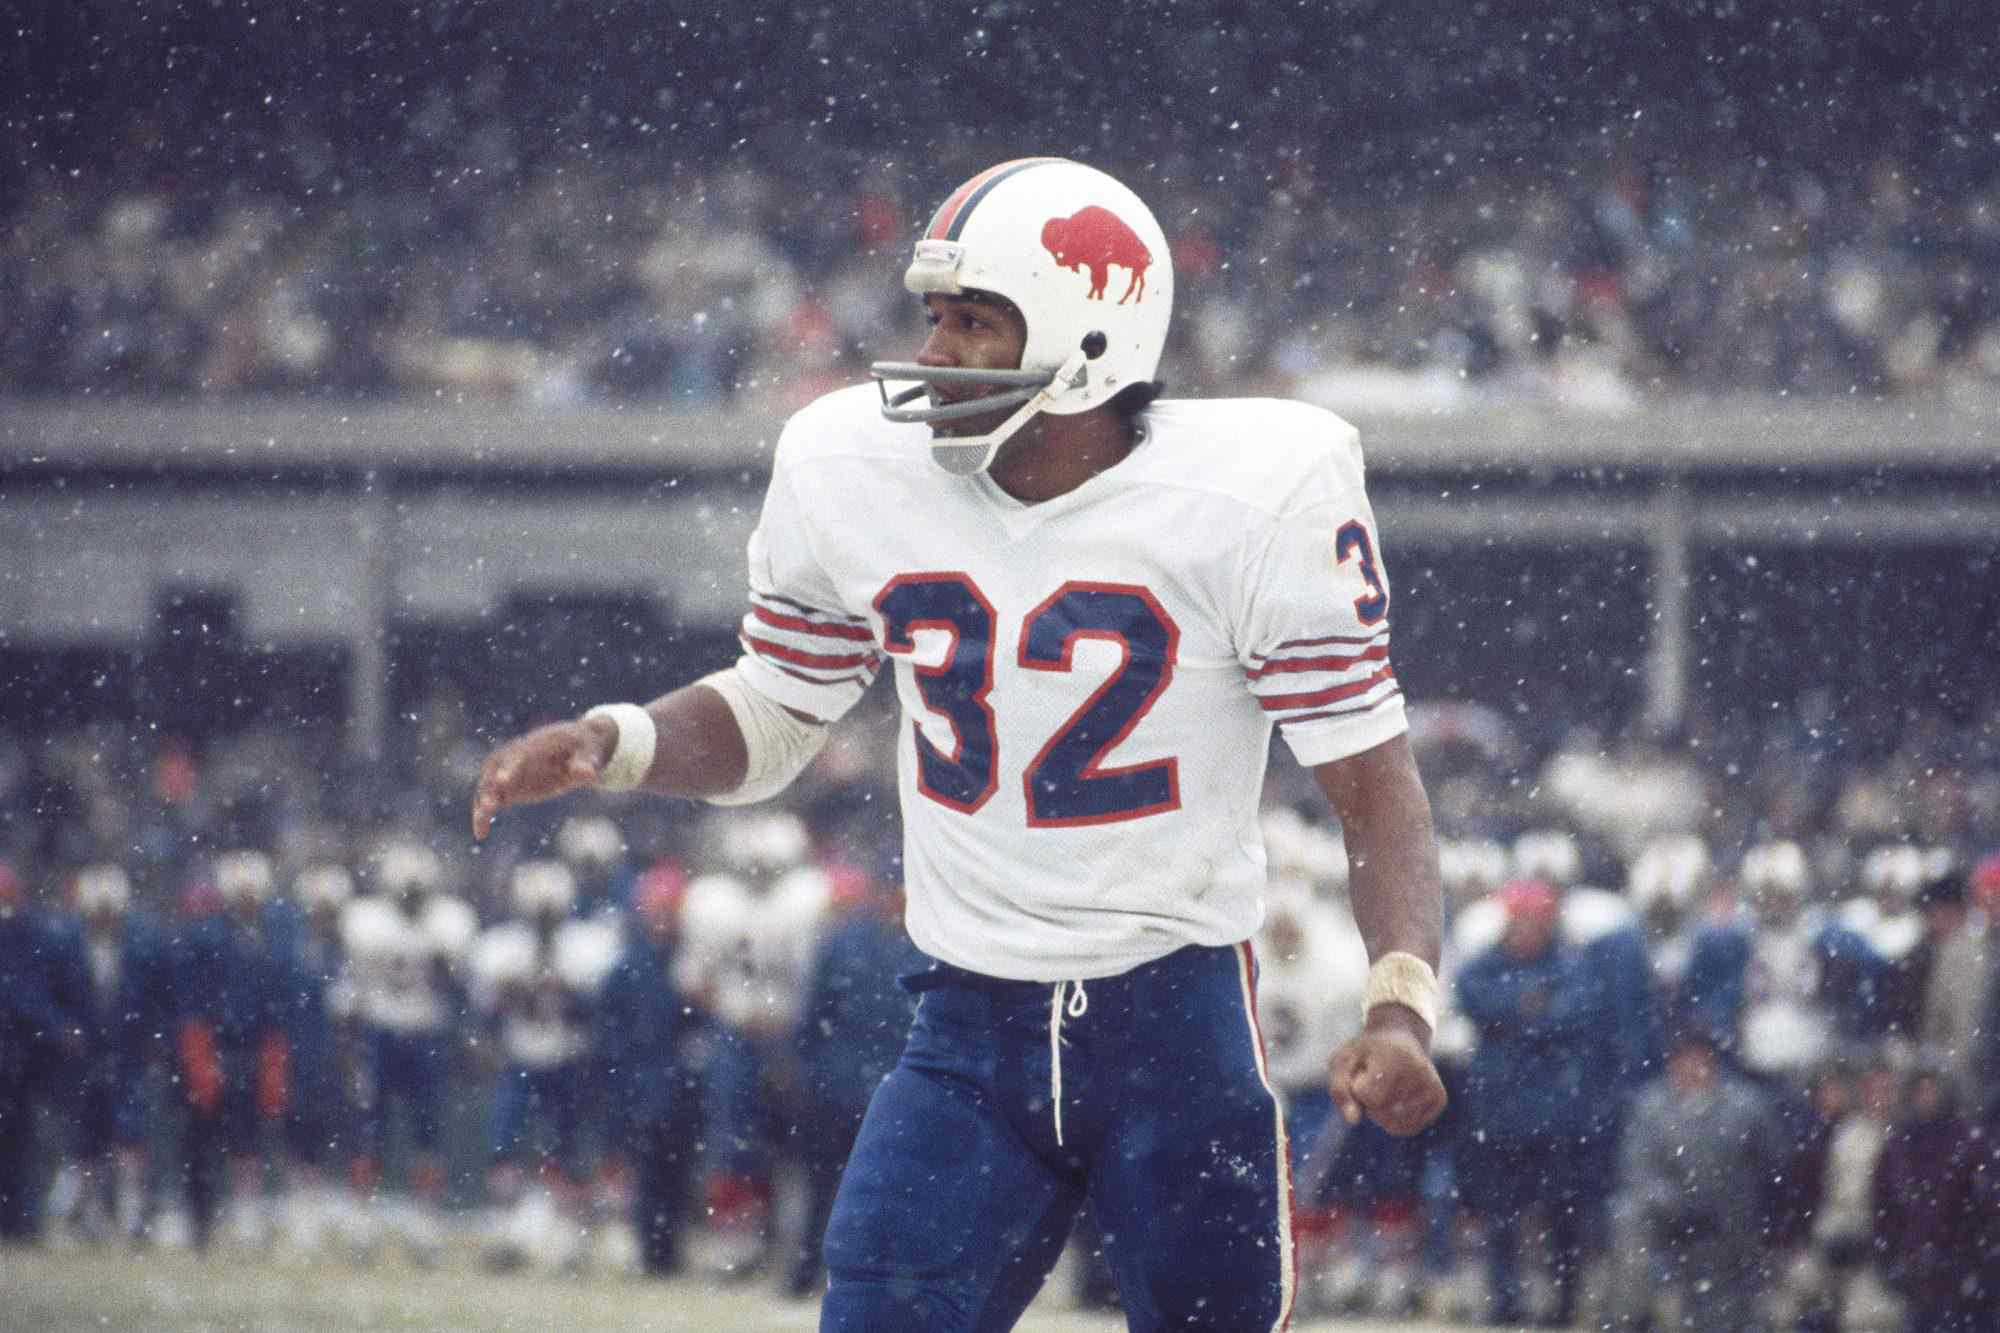 O.J. Simpson #32 of the Buffalo Bills watches the finish of a play at Shea Stadium in Flushing, New York.